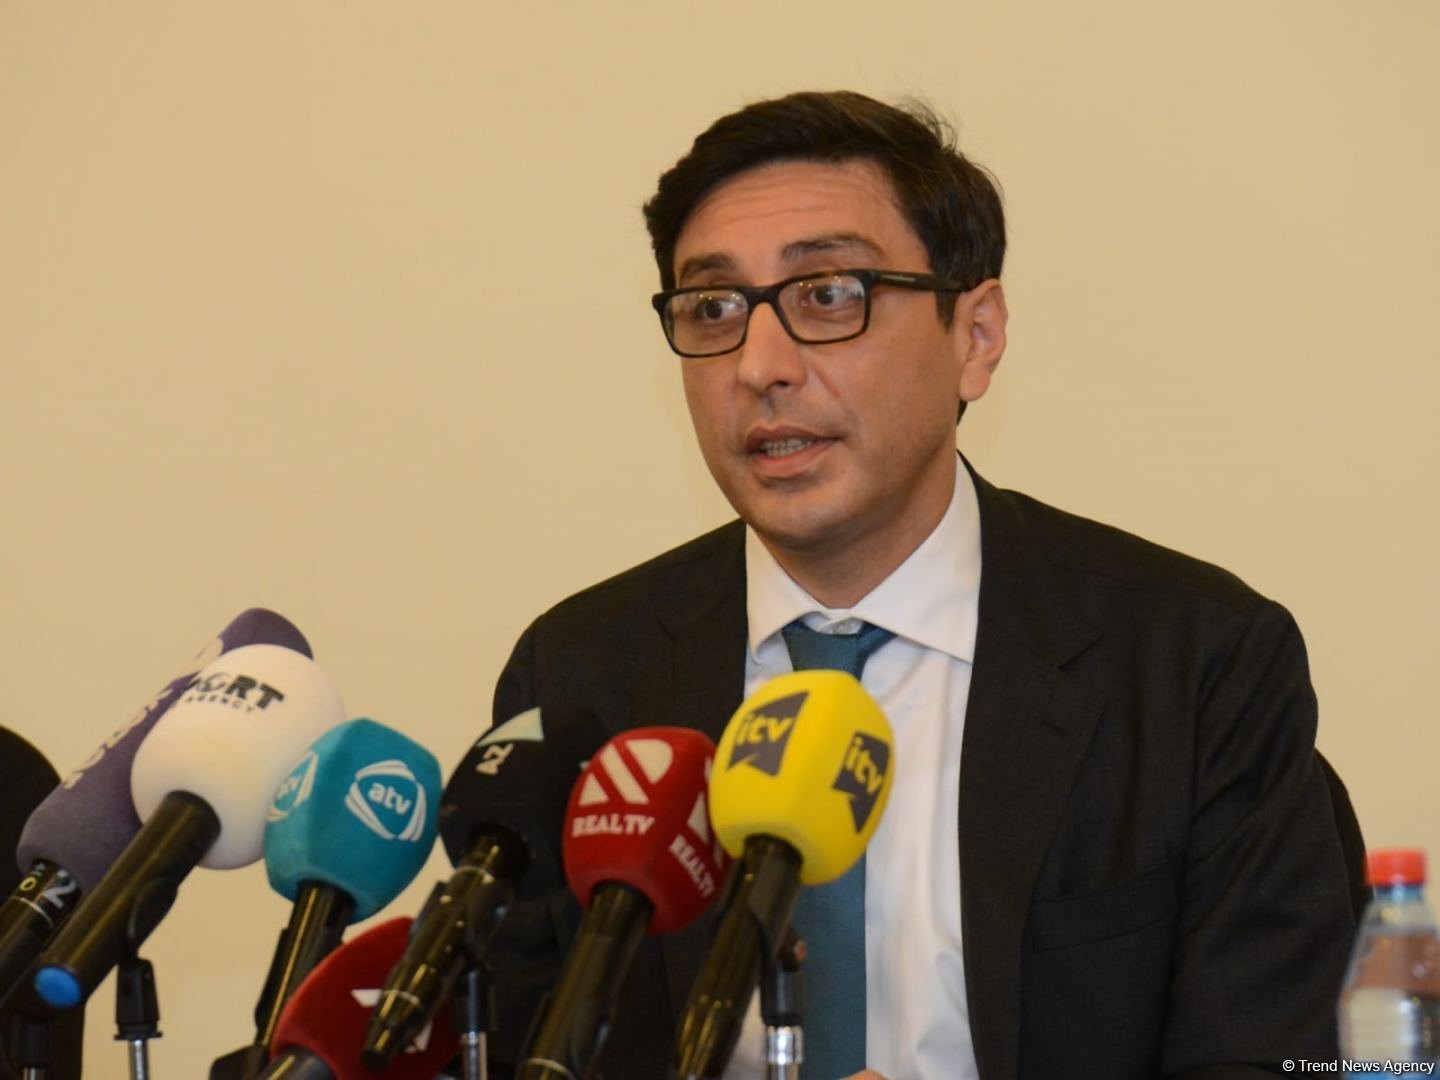 Azerbaijan's Minister of Youth and Sports talks his further international activities